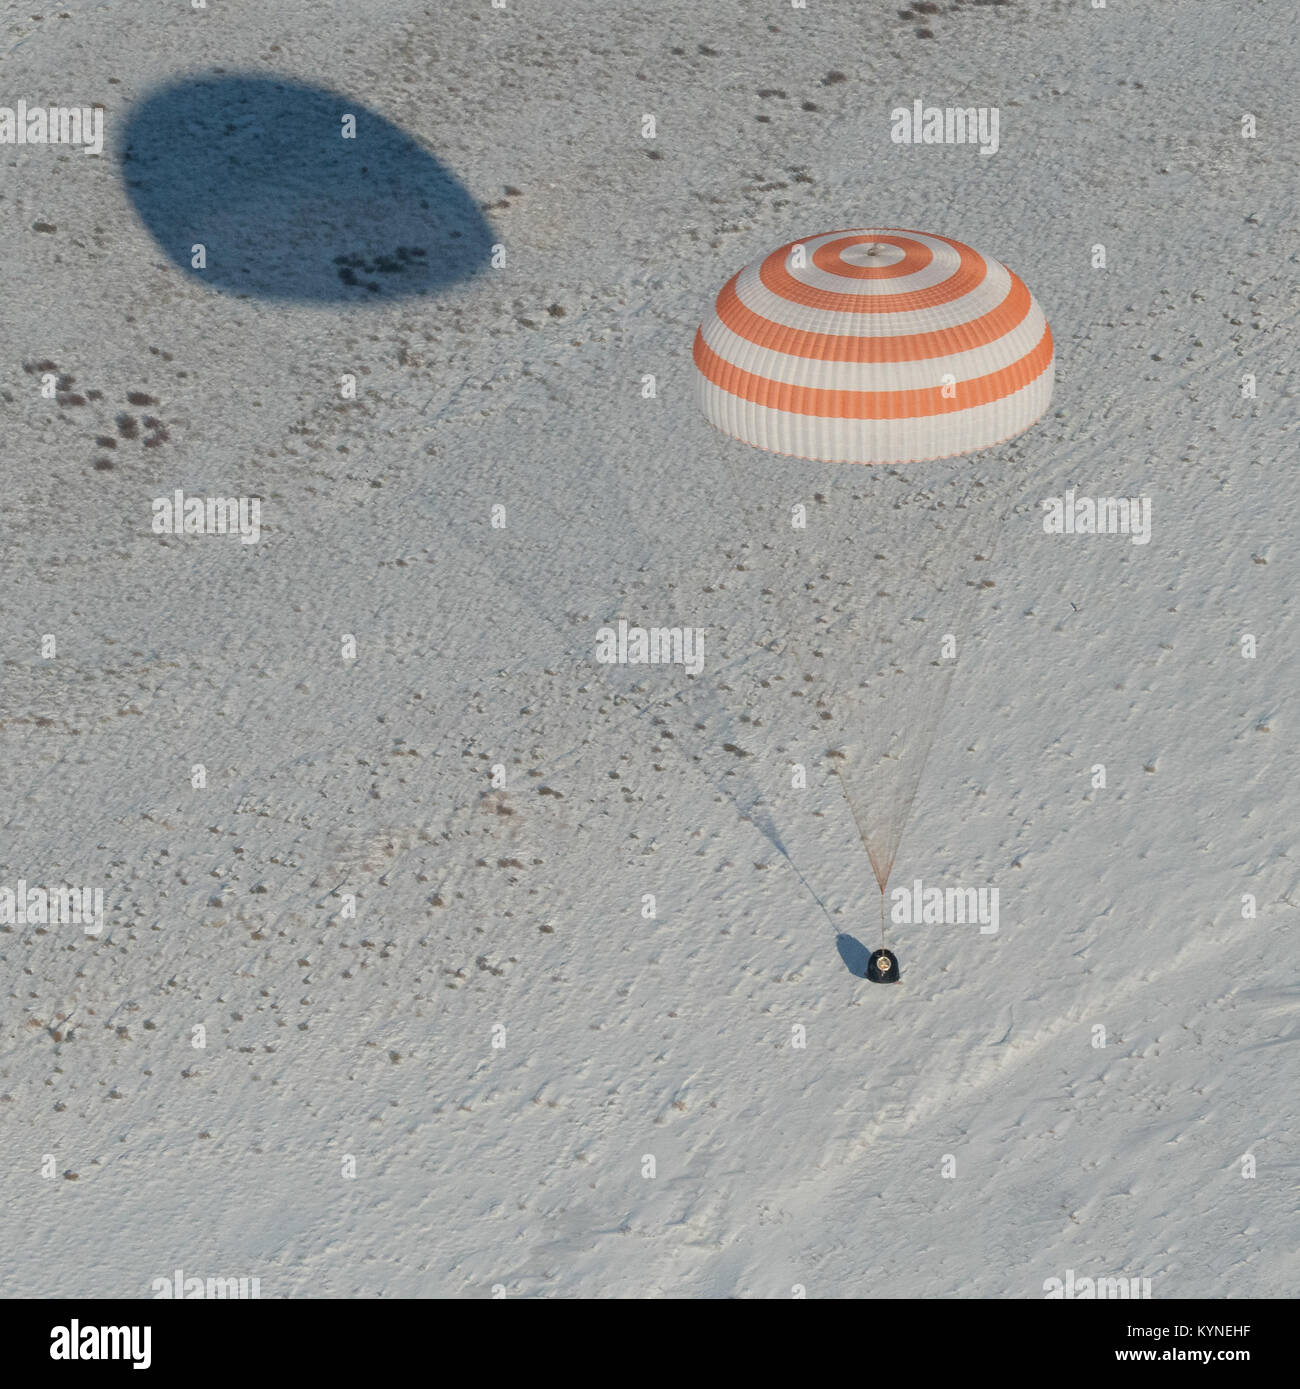 The Soyuz MS-05 spacecraft is seen as it lands with Expedition 53 Commander Randy Bresnik of NASA and Flight Engineers Paolo Nespoli of ESA (European Space Agency) and Sergey Ryazanskiy of the Russian space agency Roscosmos near the town of Zhezkazgan, Kazakhstan on Thursday, Dec. 14, 2017. Bresnik, Nespoli and Ryazanskiy are returning after 139 days in space where they served as members of the Expedition 52 and 53 crews onboard the International Space Station. Photo Credit: (NASA/Bill Ingalls) Stock Photo